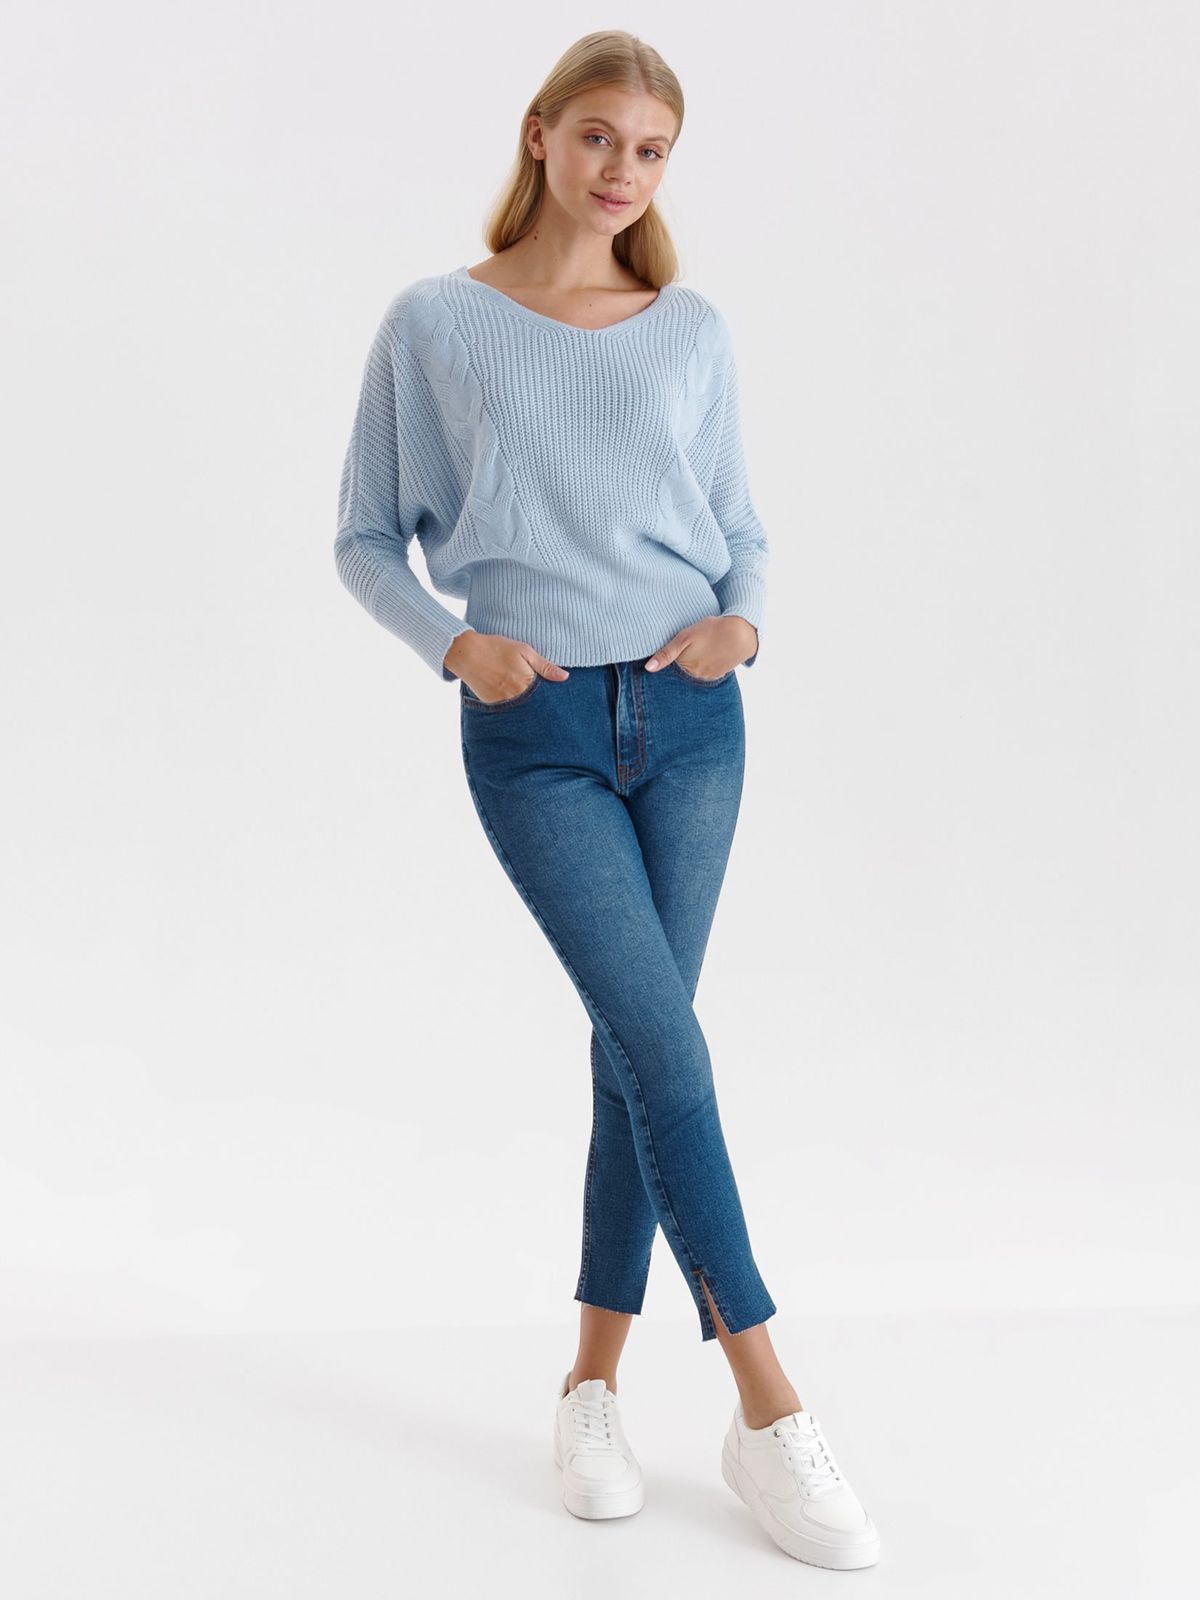 Lightblue sweater knitted loose fit raised pattern